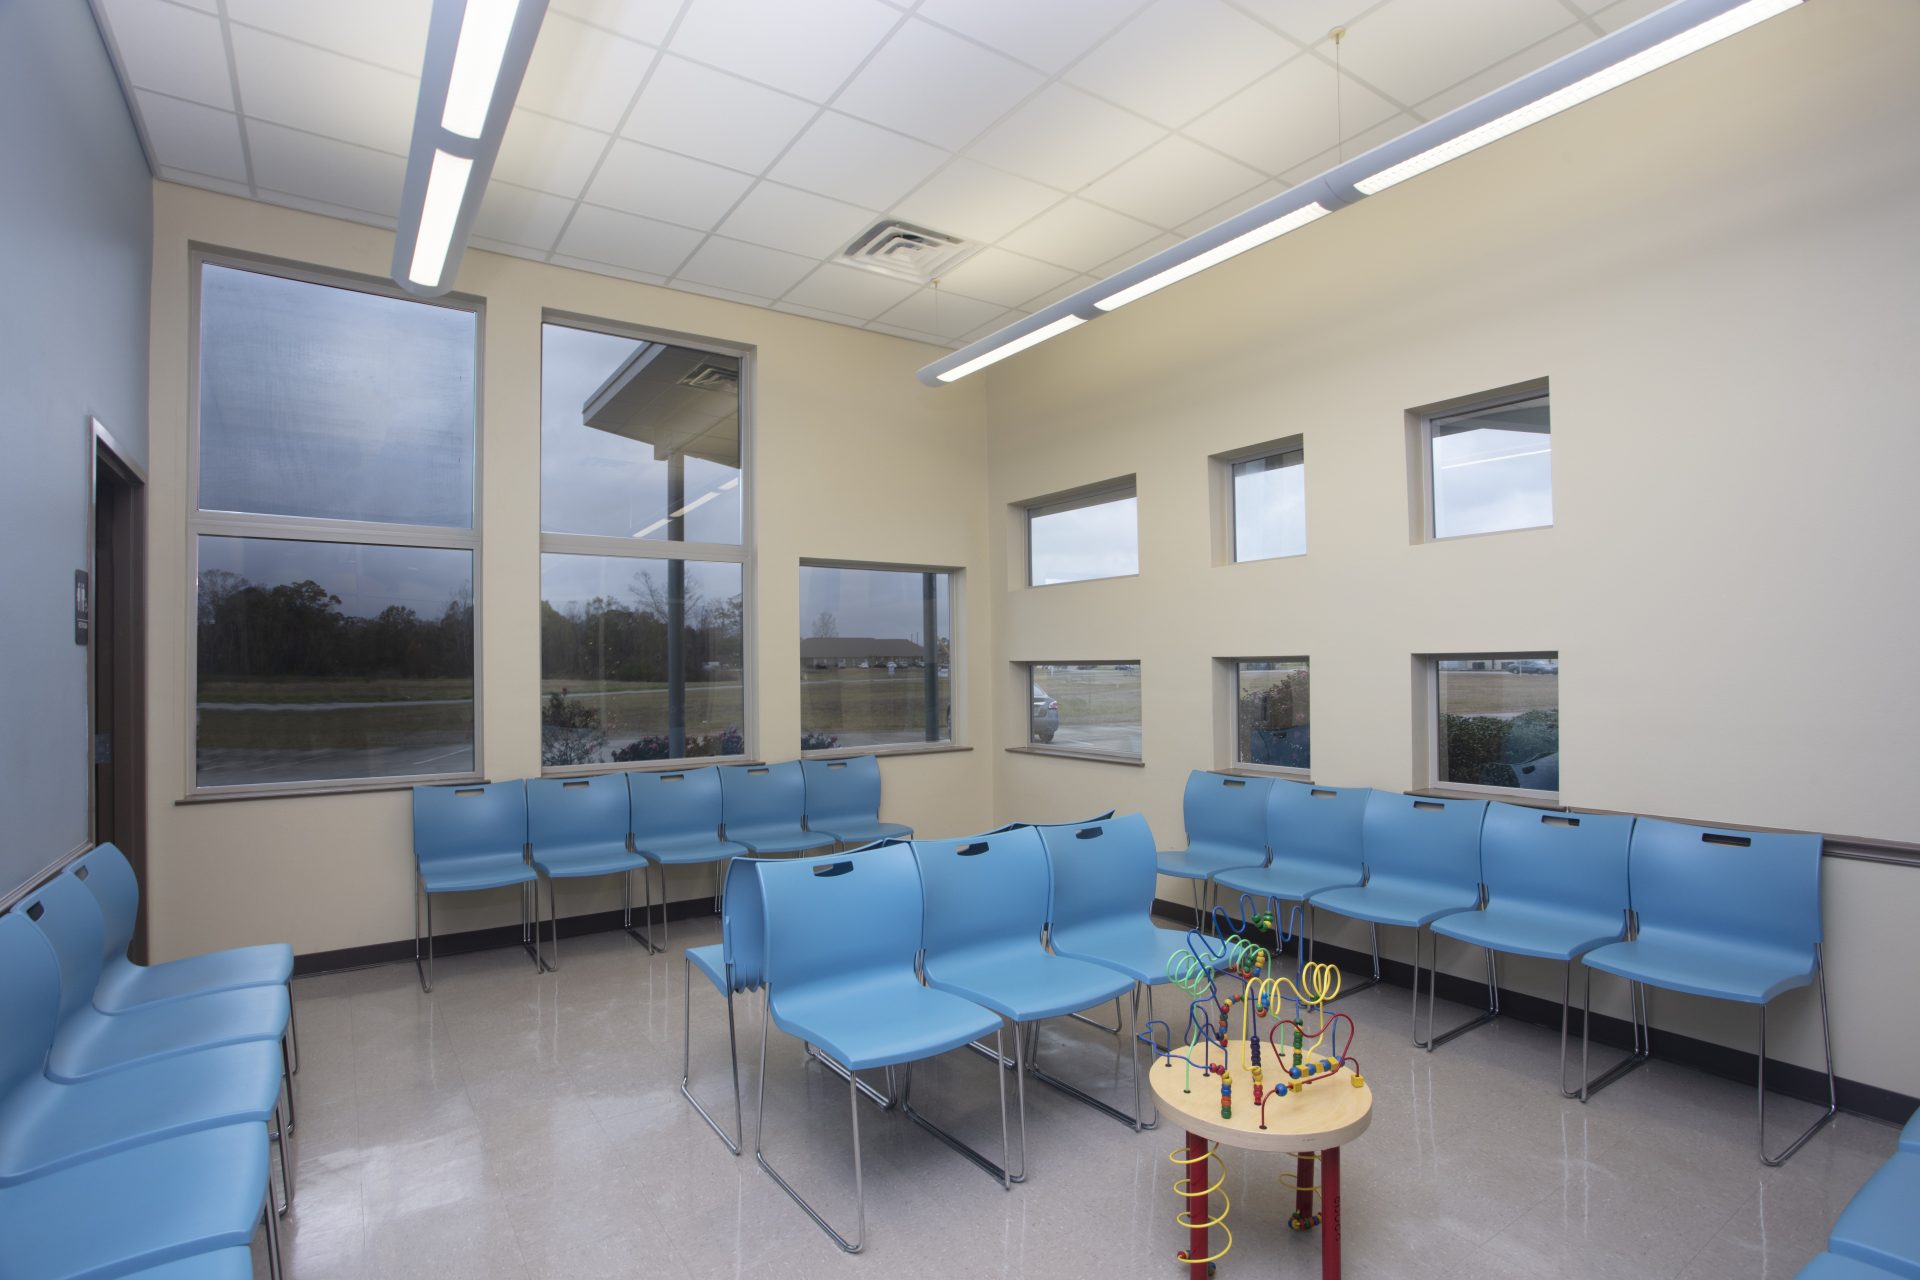 Waiting room with bright blue chairs and multiple windows